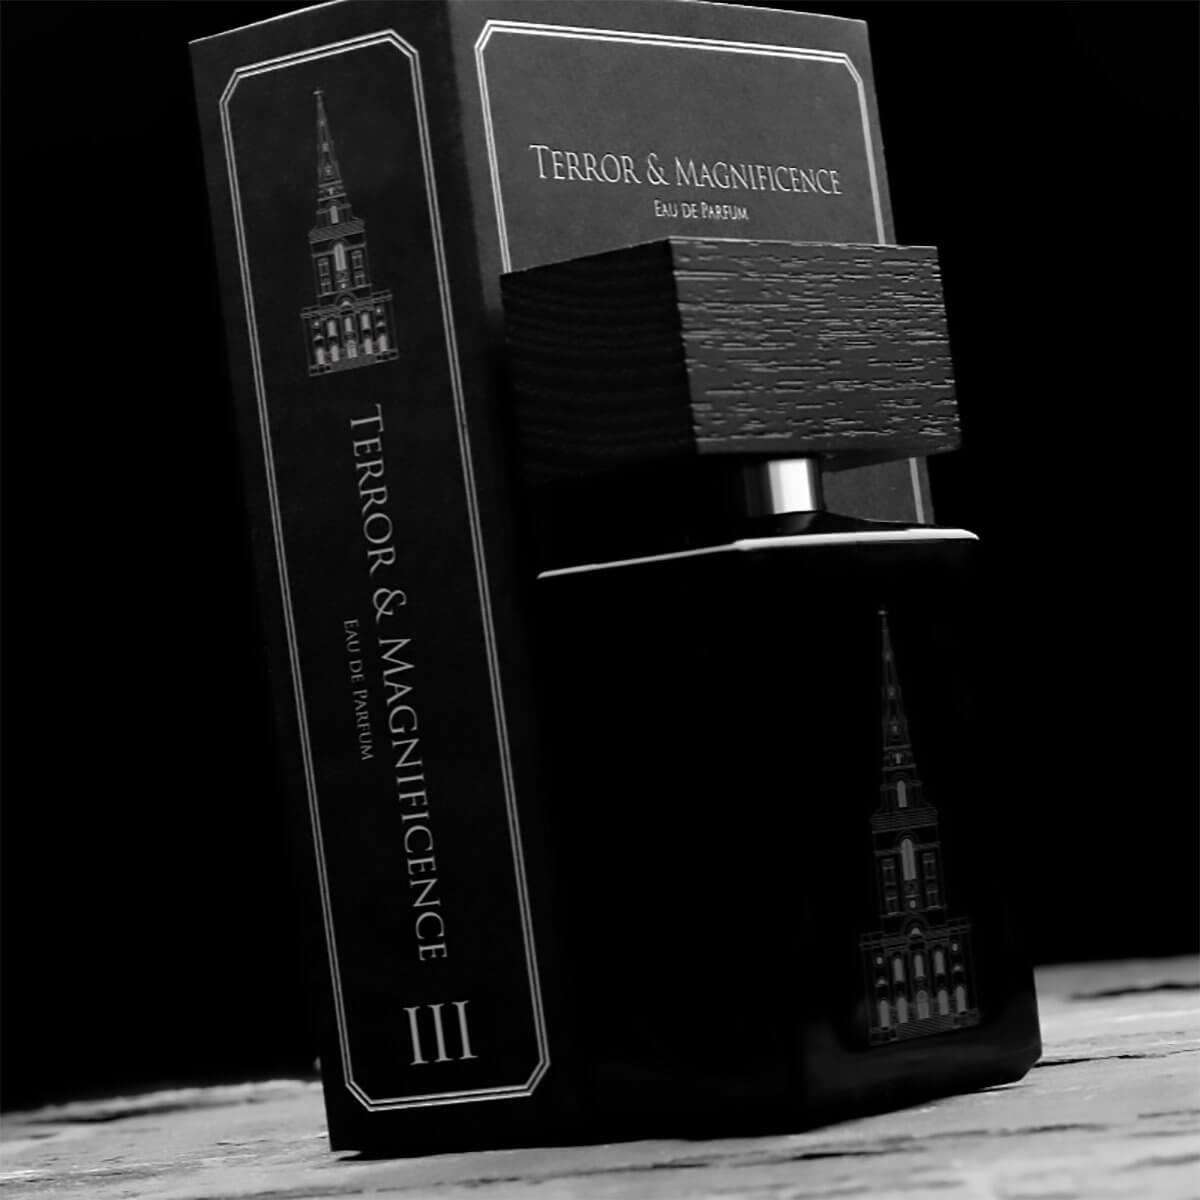 Terror and Magnificence by Beaufort London - Indigo Perfumery